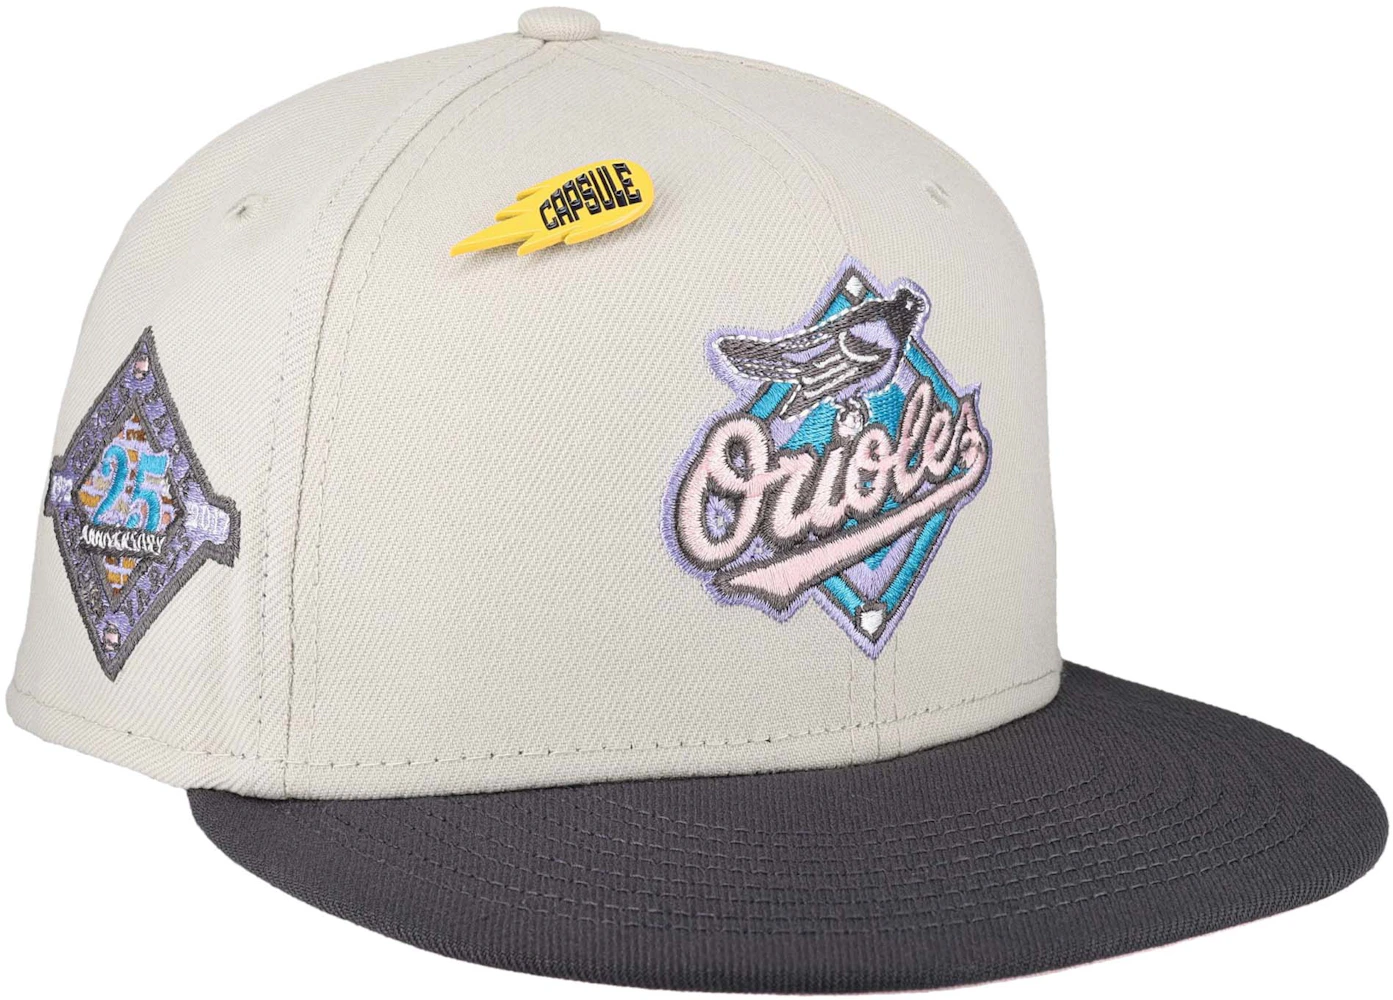 I fixed my city connect hat : r/orioles